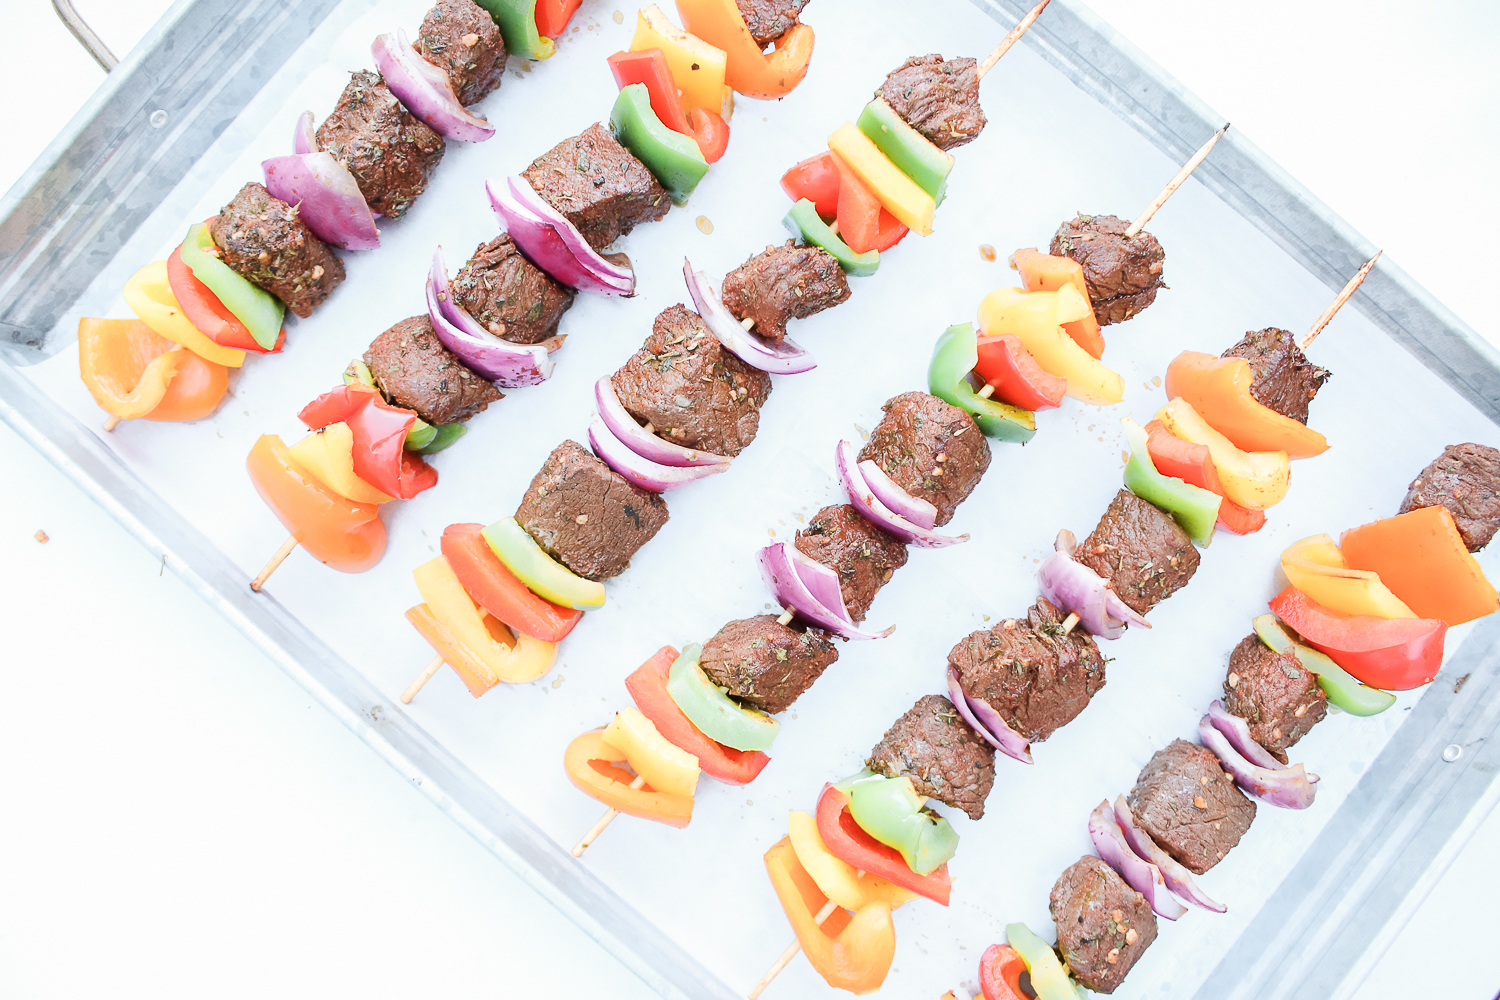 Blogger Stephanie Ziajka shows how to make steak kabobs in oven on Diary of a Debutante